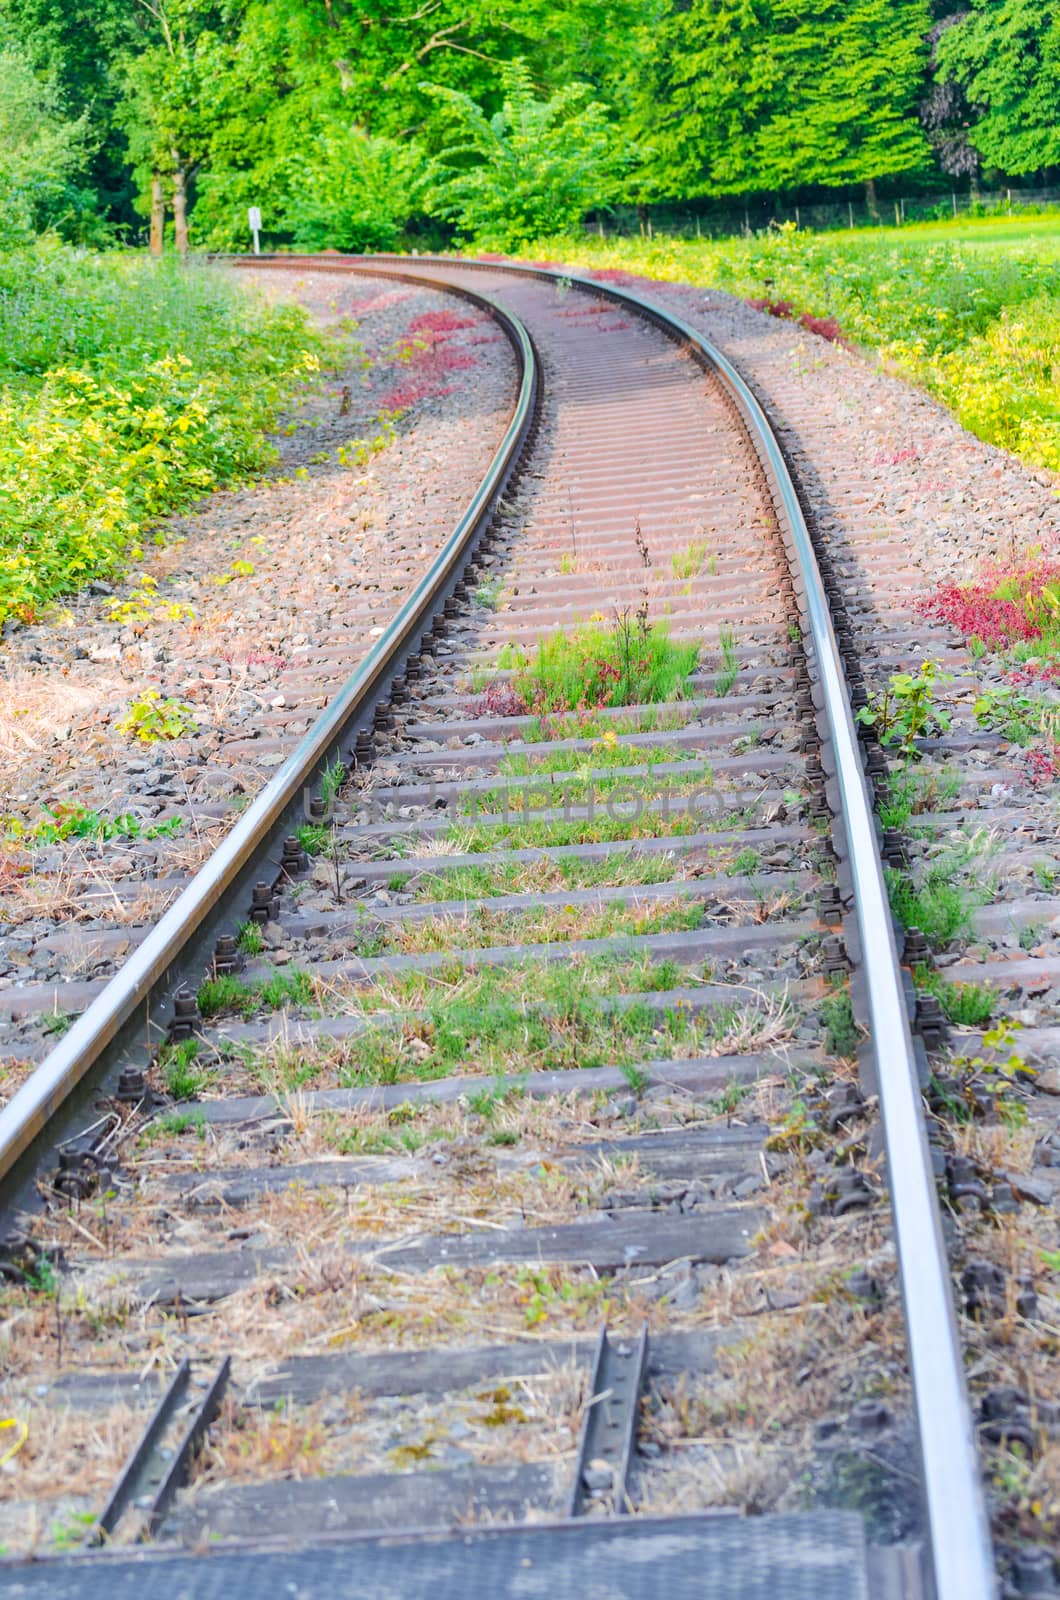 View on railroad tracks, track with a colorful plantings.